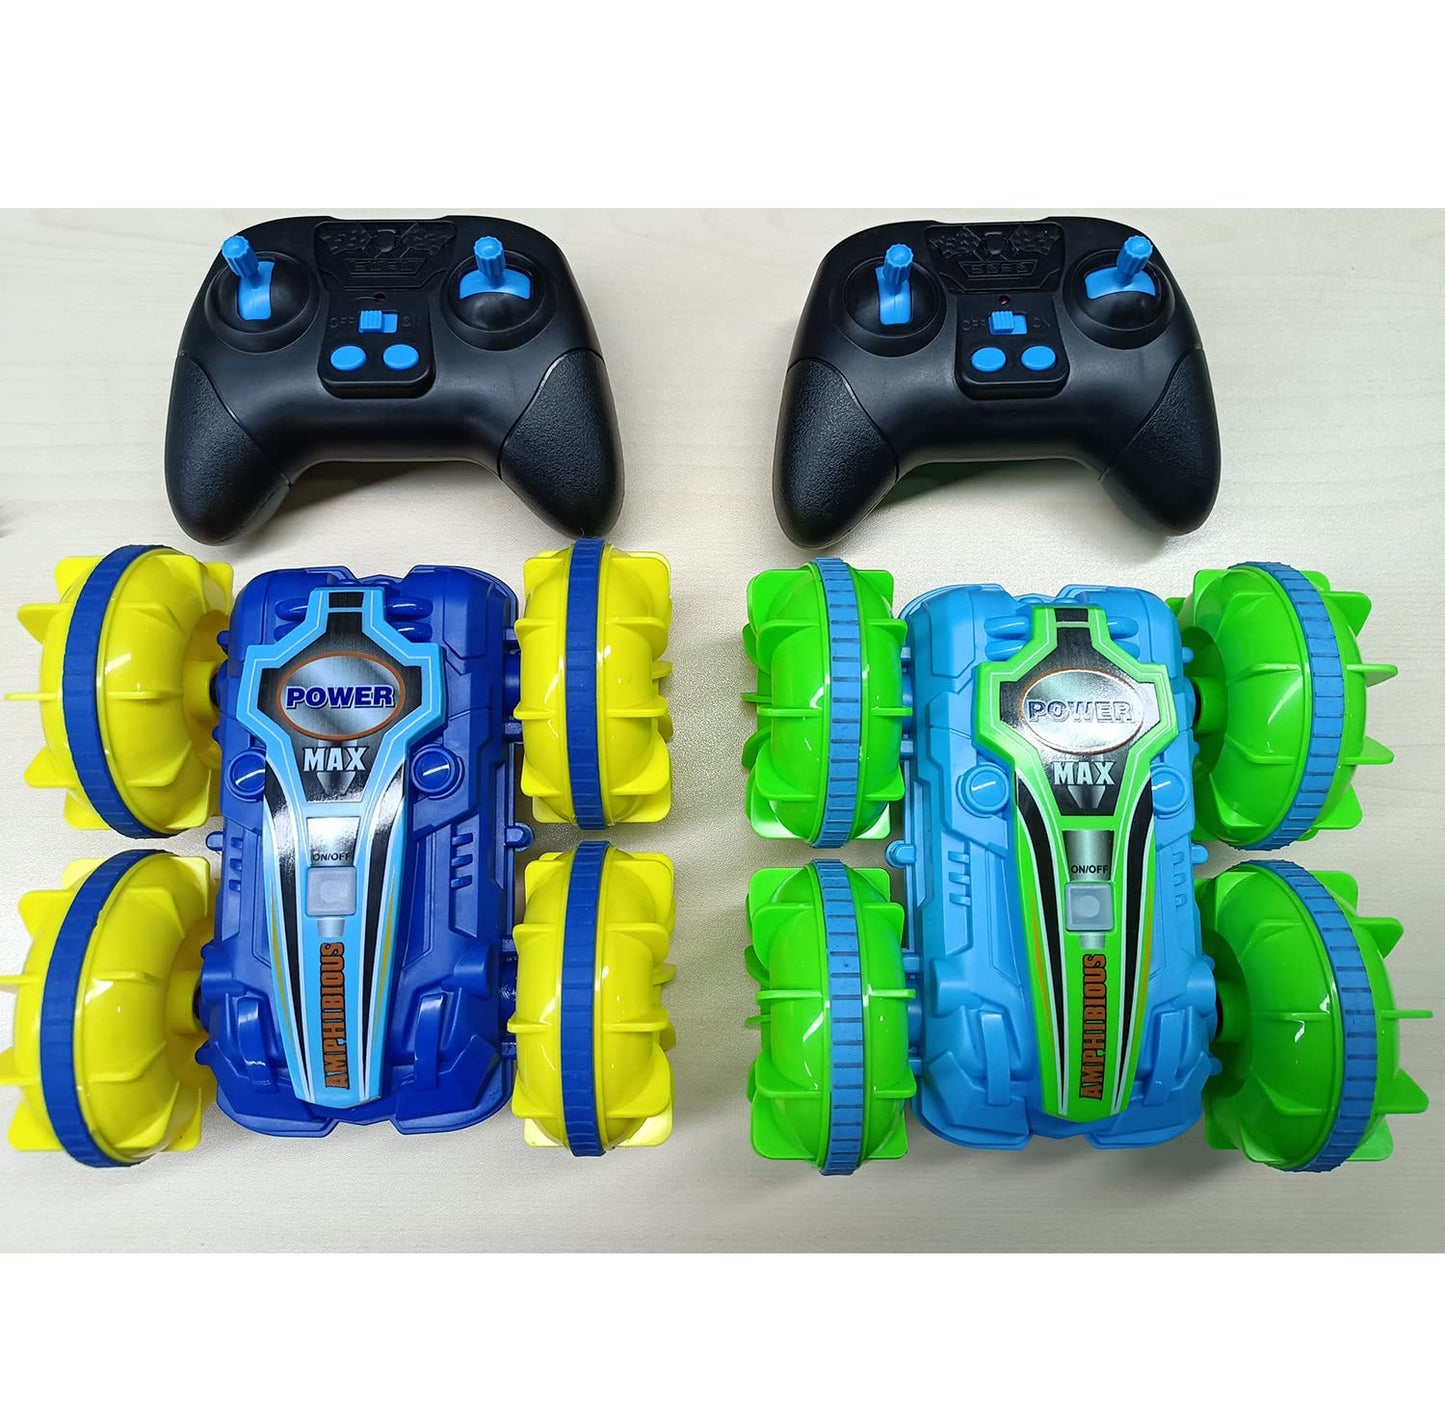 2 Pack Amphibious Remote Control Cars for Boys 5-12, 4WD 2.4GHz Waterproof RC Stunt Car for Kids, Rotating 360隆茫 Off Road All Terrain RC Vehicle, Water Beach Pool Toy, Blue+Green